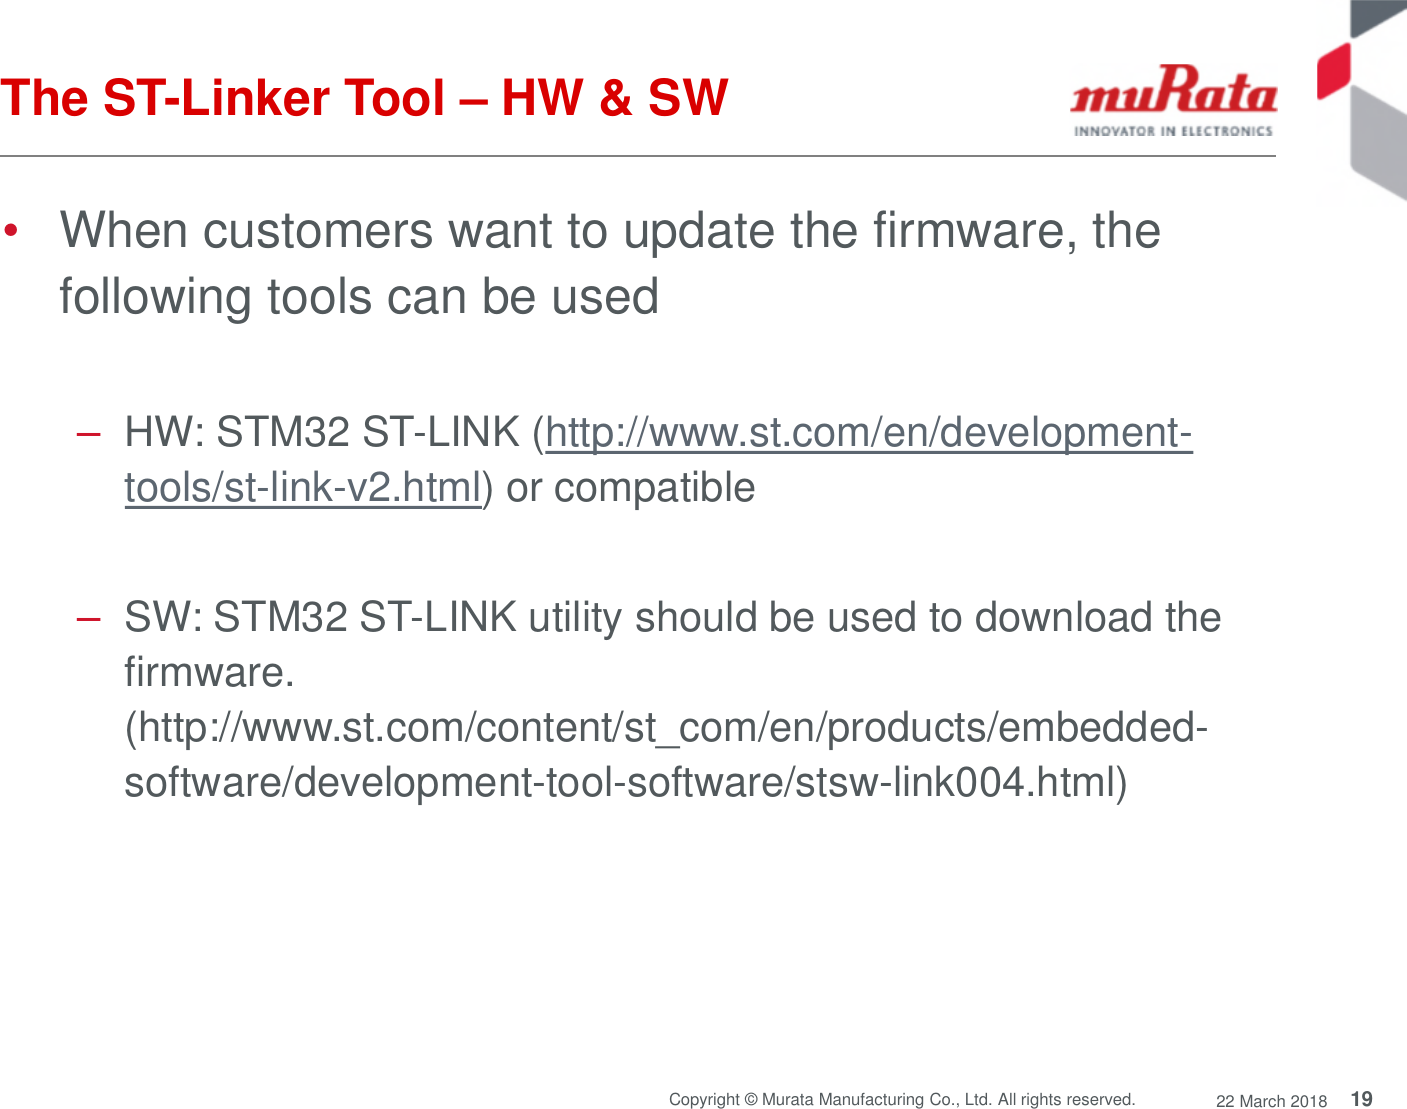 19Copyright © Murata Manufacturing Co., Ltd. All rights reserved. 22 March 2018The ST-Linker Tool – HW &amp; SW•When customers want to update the firmware, thefollowing tools can be used–HW: STM32 ST-LINK (http://www.st.com/en/development-tools/st-link-v2.html) or compatible–SW: STM32 ST-LINK utility should be used to download thefirmware.(http://www.st.com/content/st_com/en/products/embedded-software/development-tool-software/stsw-link004.html)